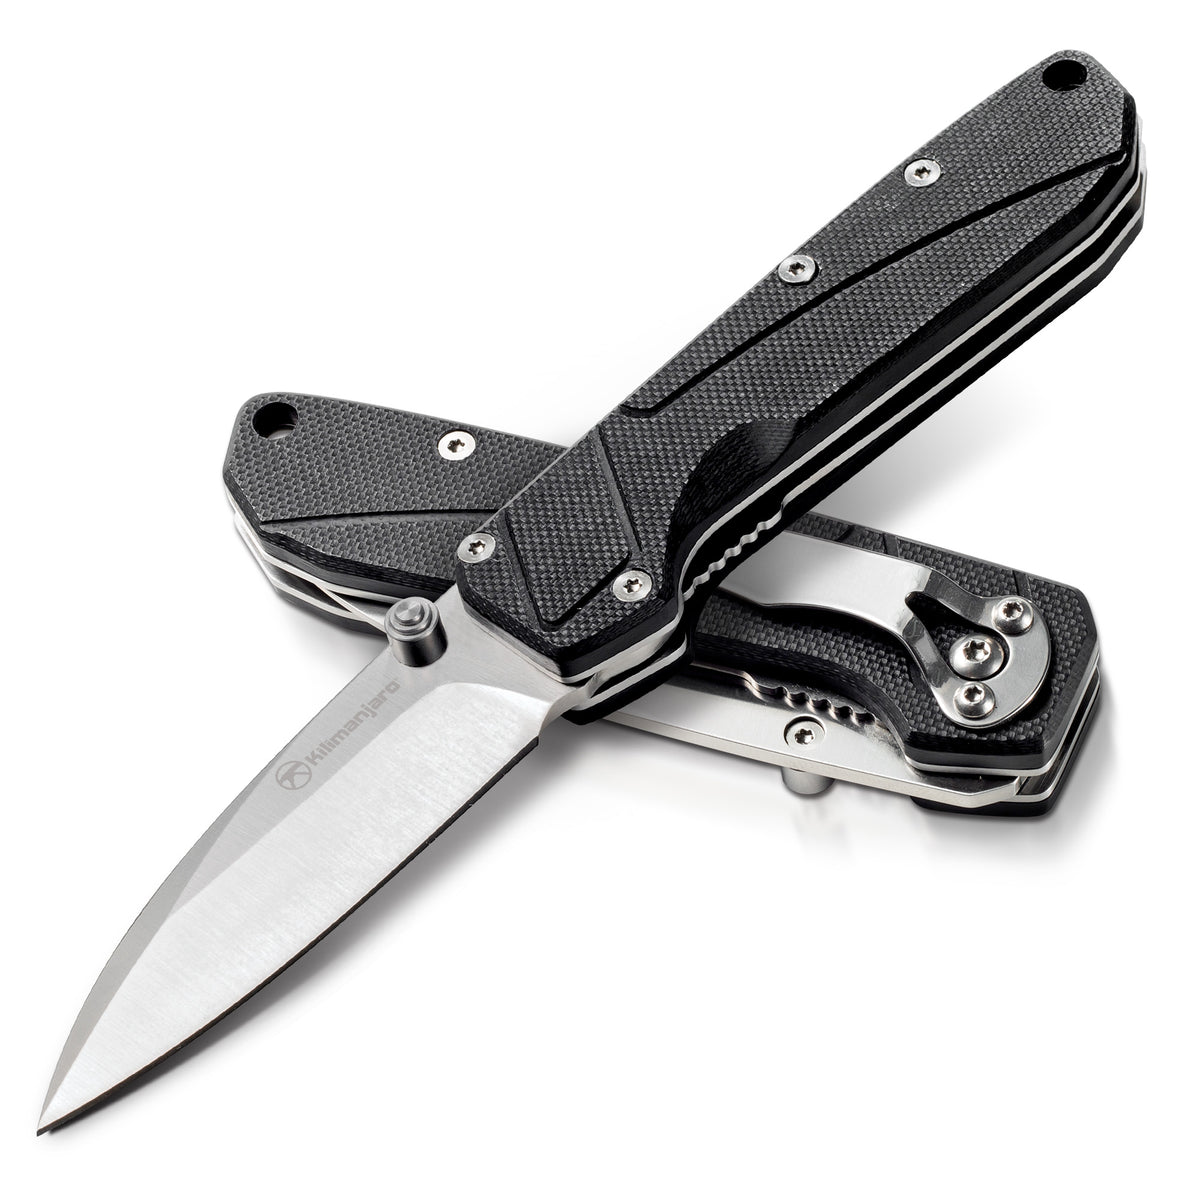 6 Open Assisted Folding Fixed Blade Pocket Knife EDC For Home/Outdoor Knife  NEW